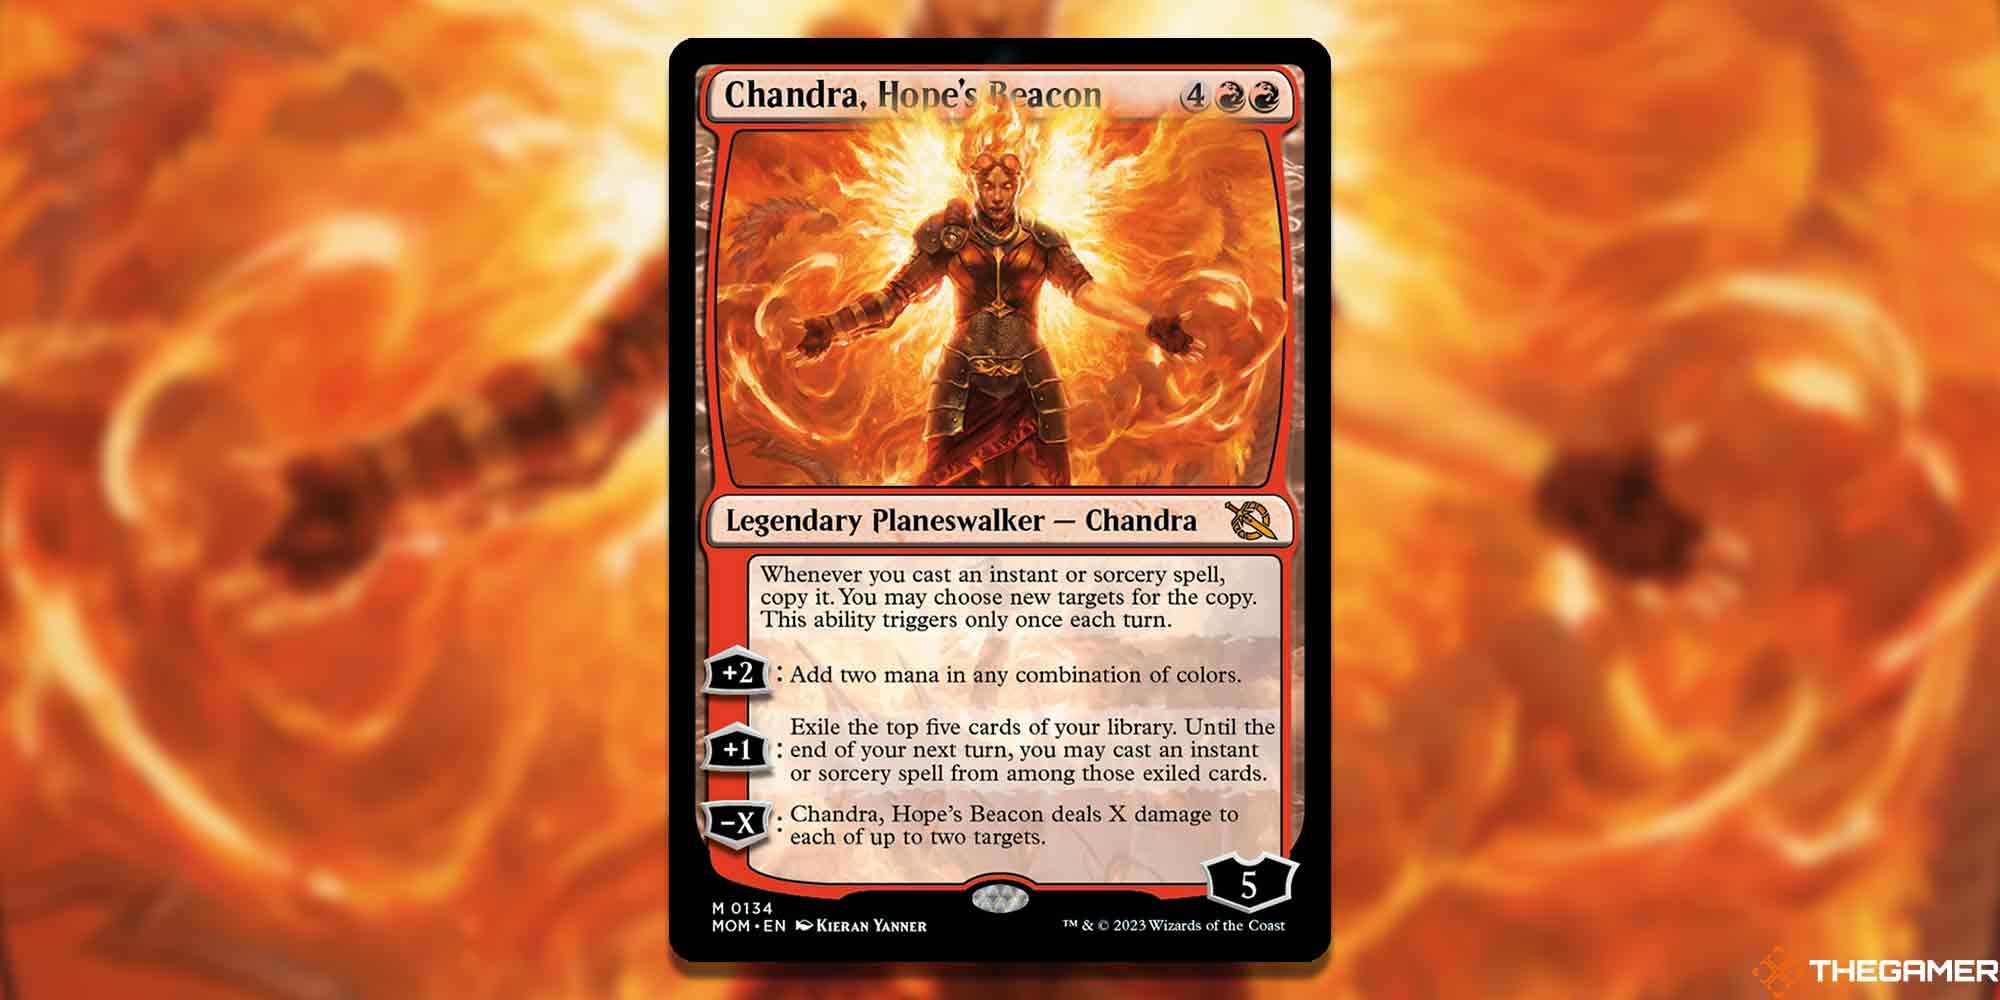 Chandra, the Beacon of Hope card and Magic the Gathering art background.